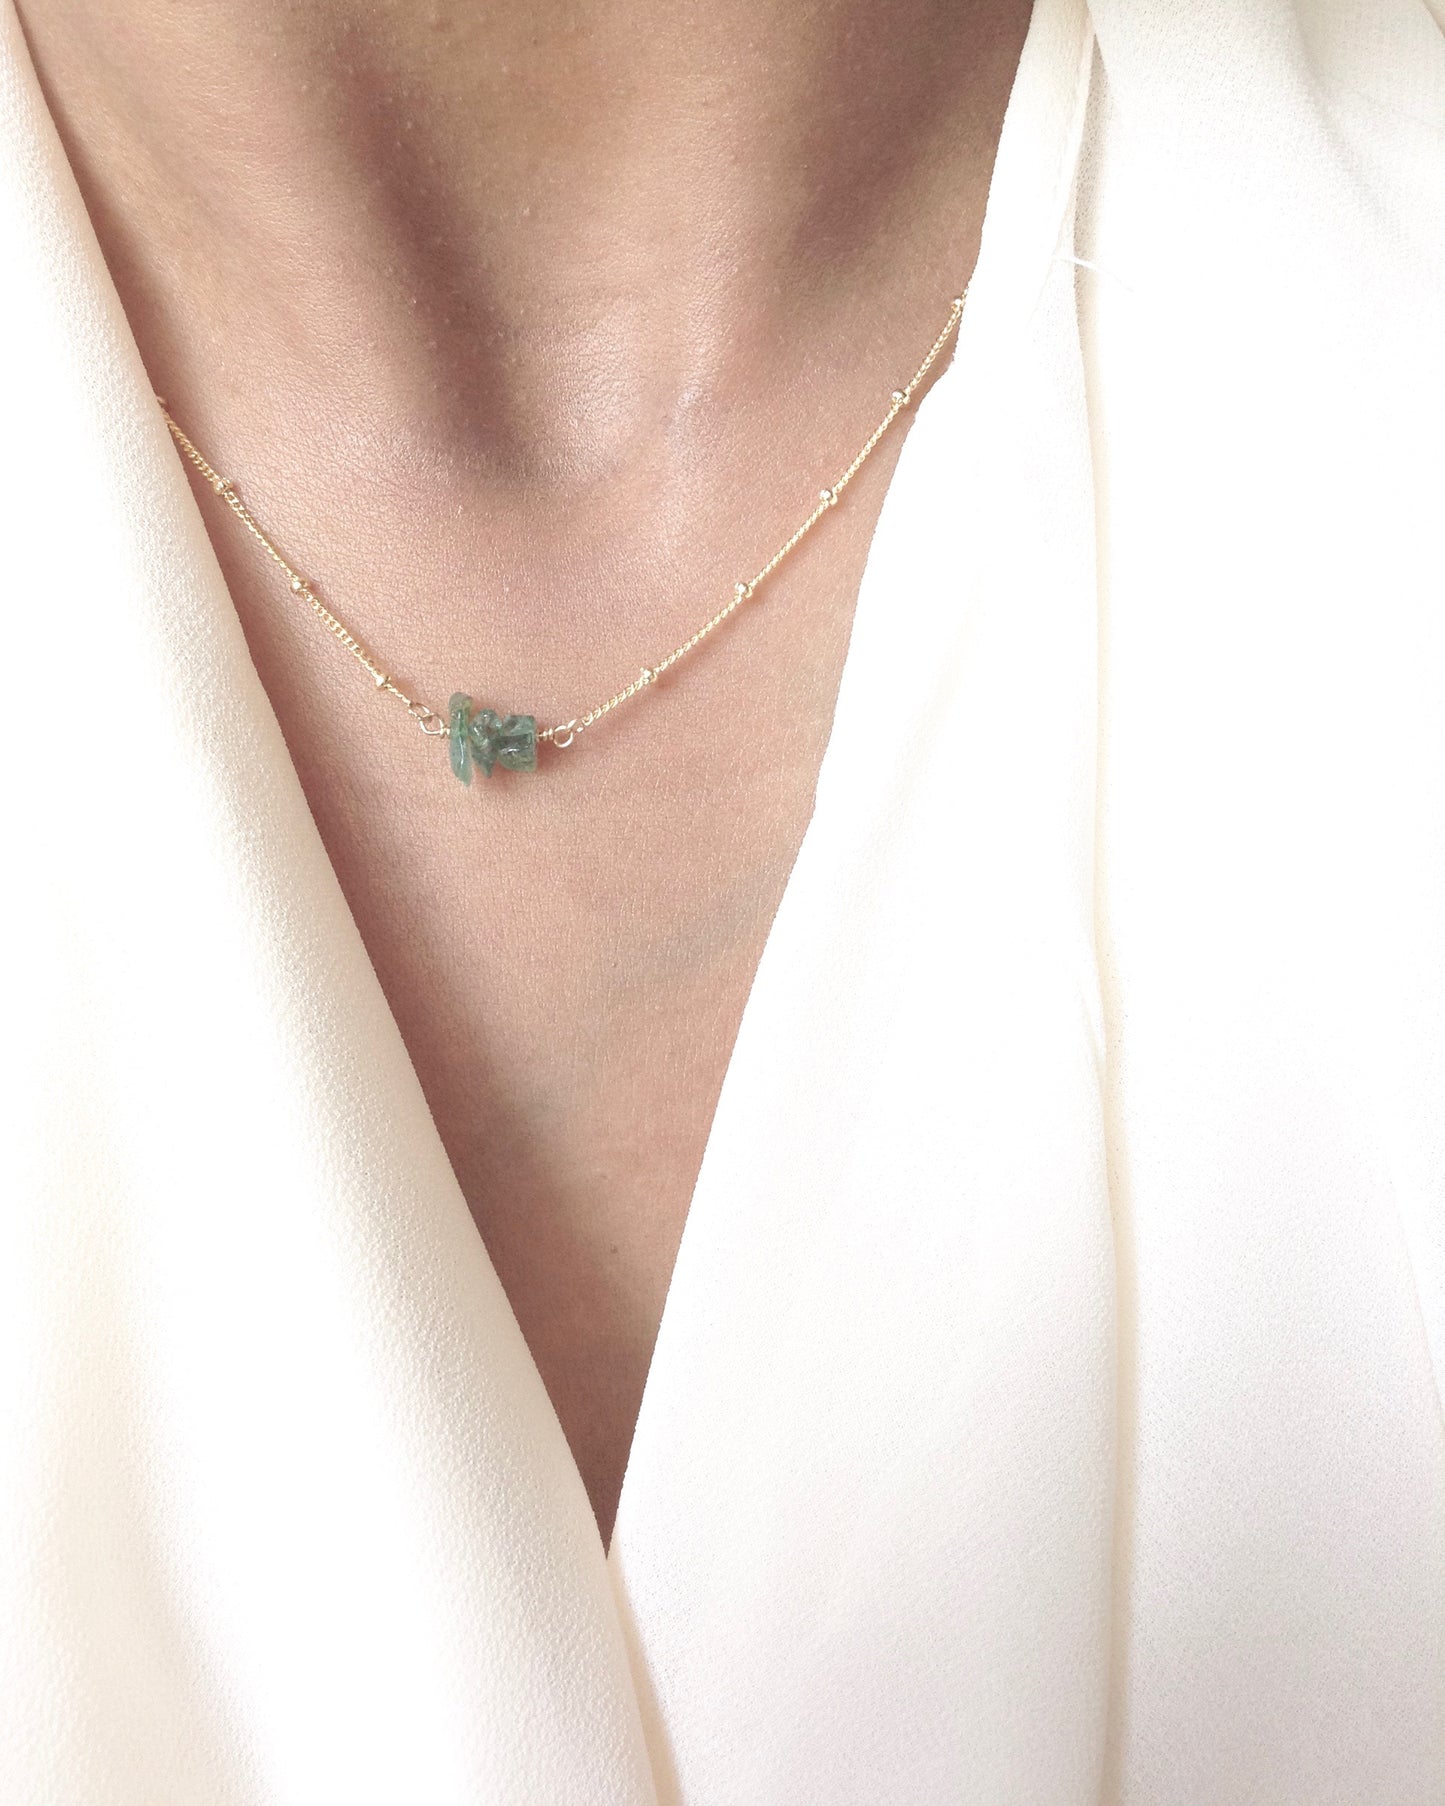 Dainty Emerald Minimalist Gemstone Necklace in Gold Filled or Sterling Silver | IB Jewelry